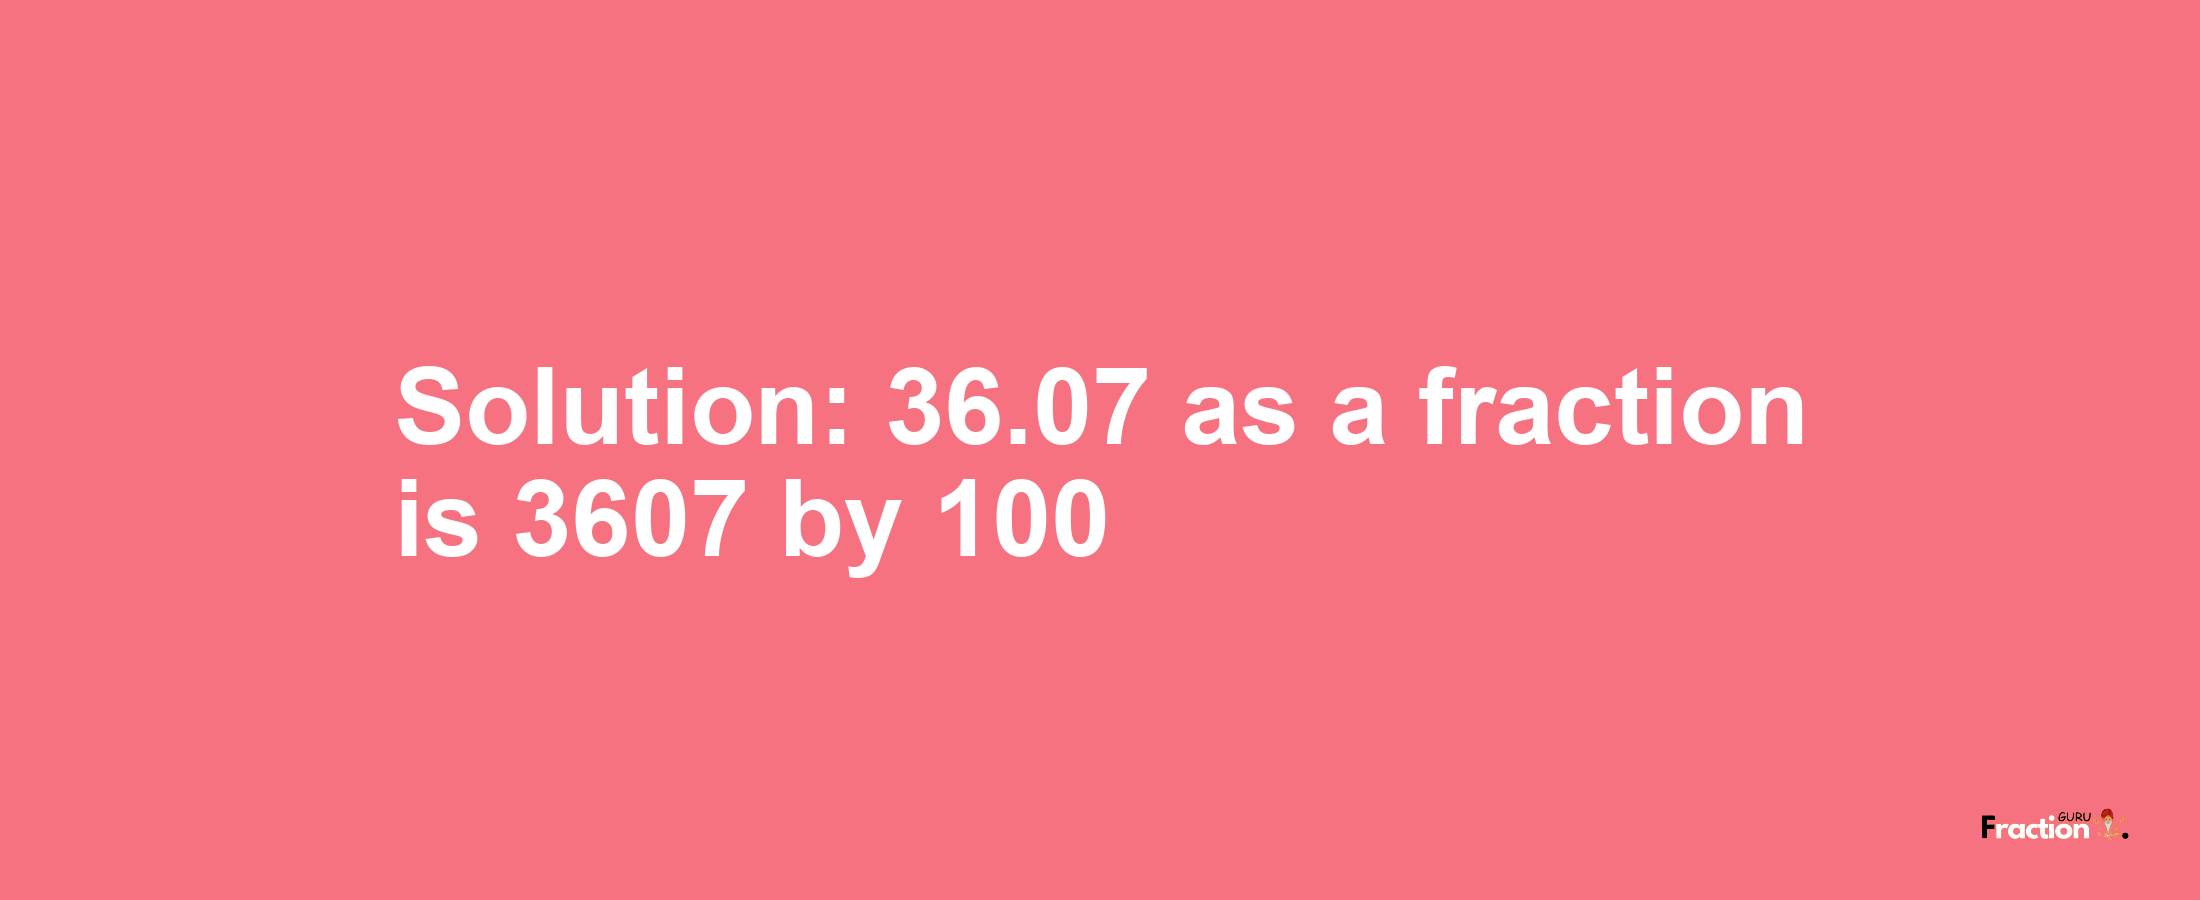 Solution:36.07 as a fraction is 3607/100